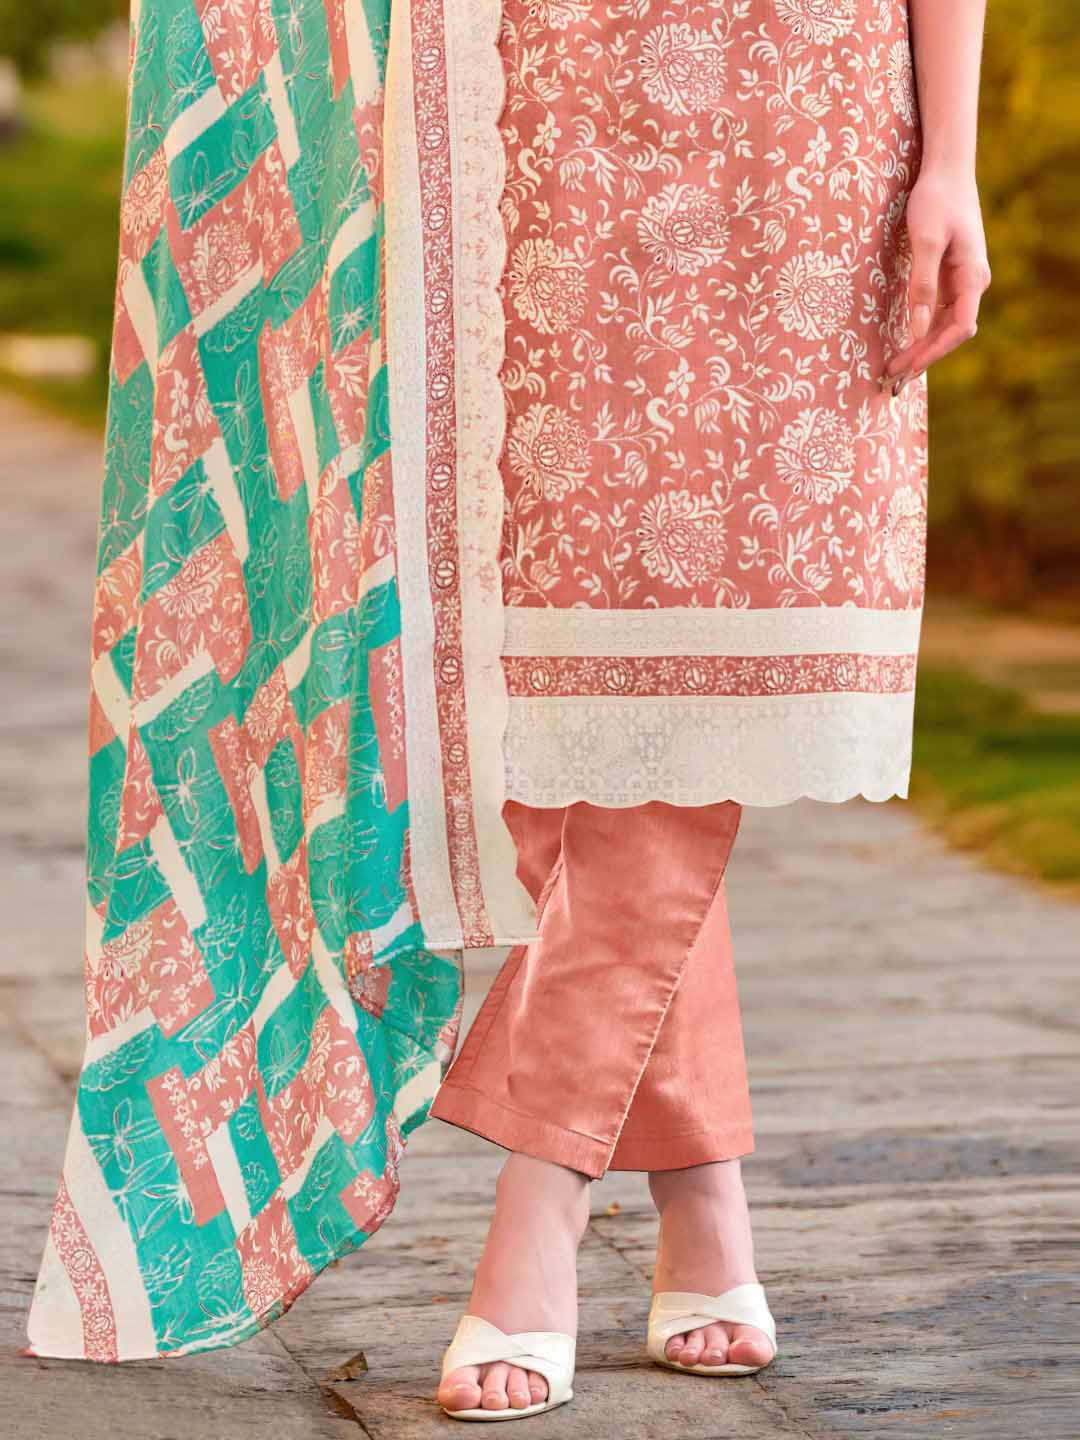 Zulfat Peach Unstitched Cotton Suit Material for Women with Dupatta